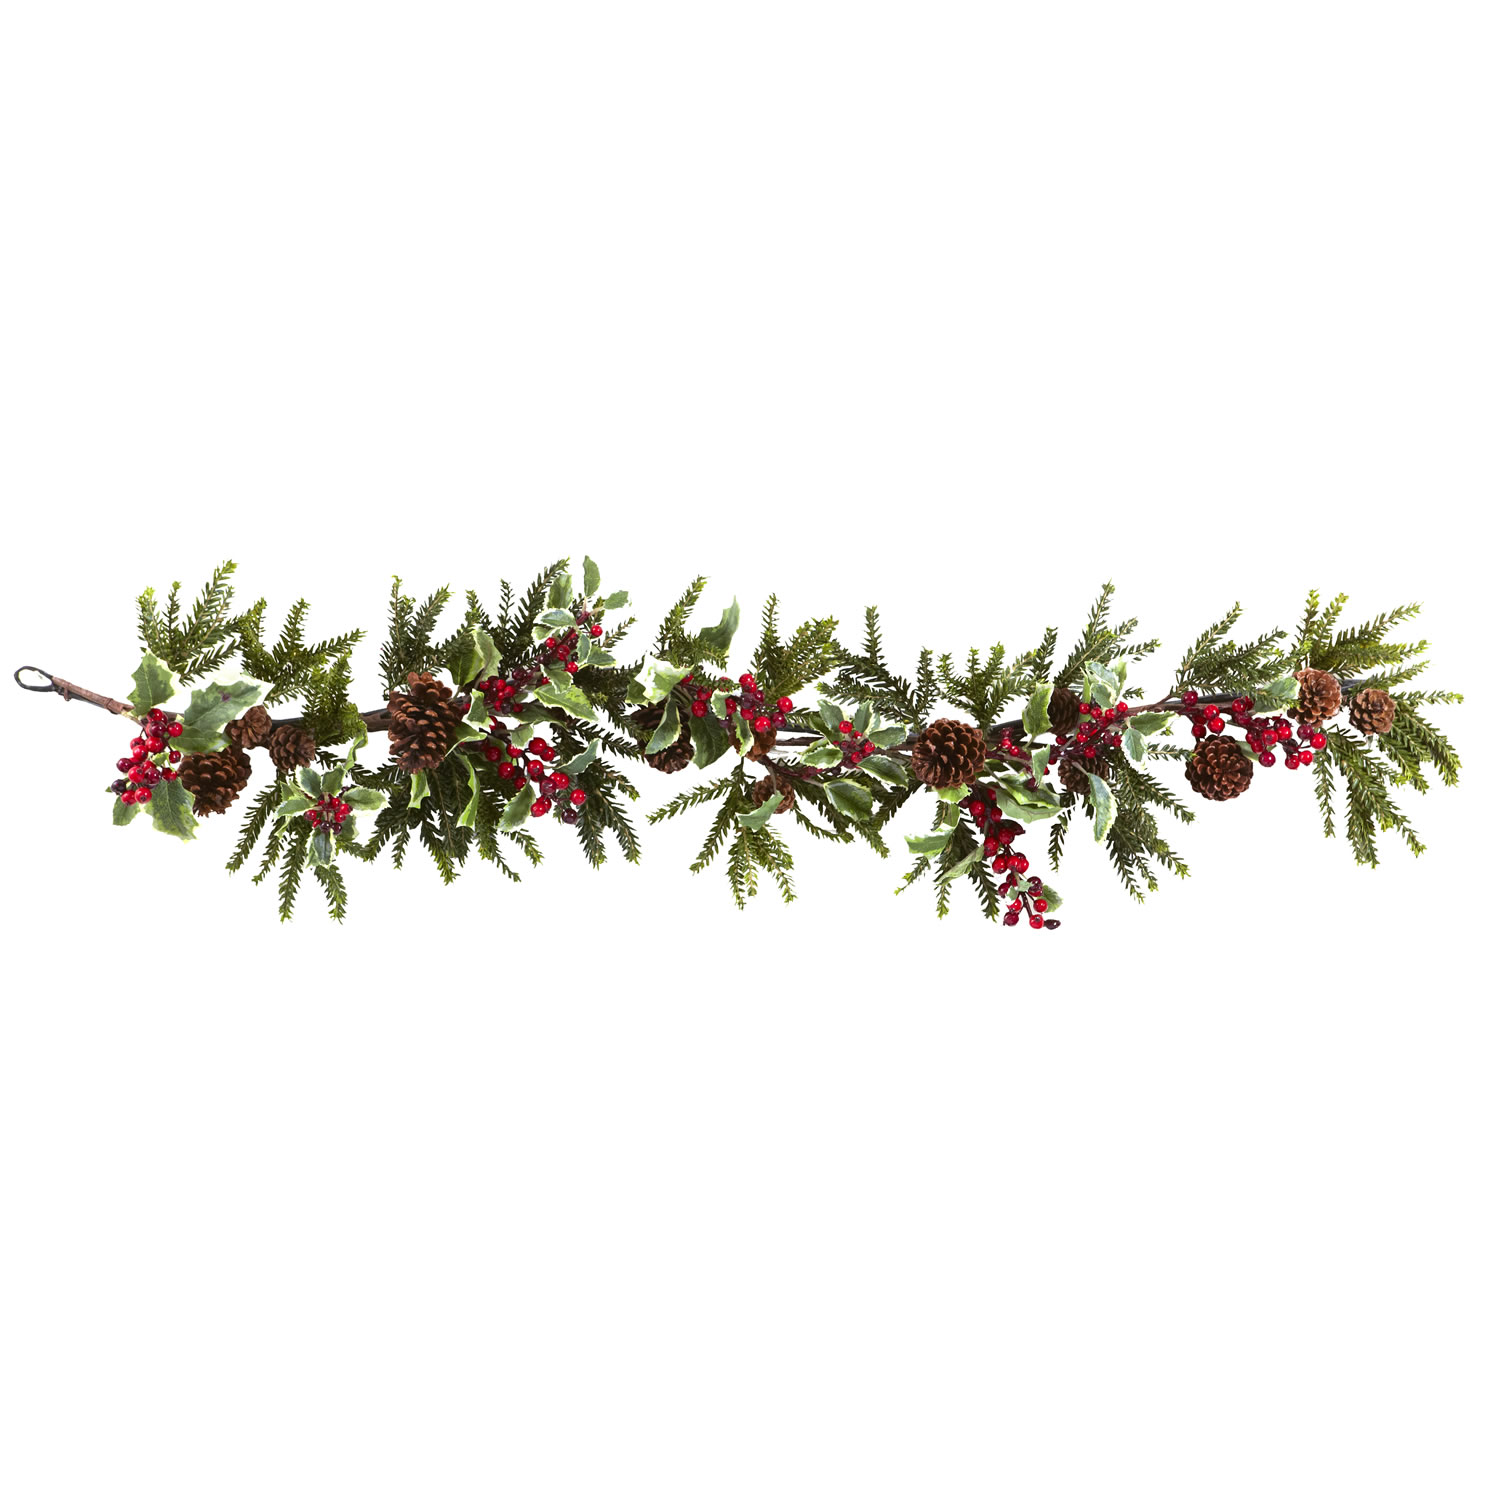 holly garland with berries - Clip Art Library